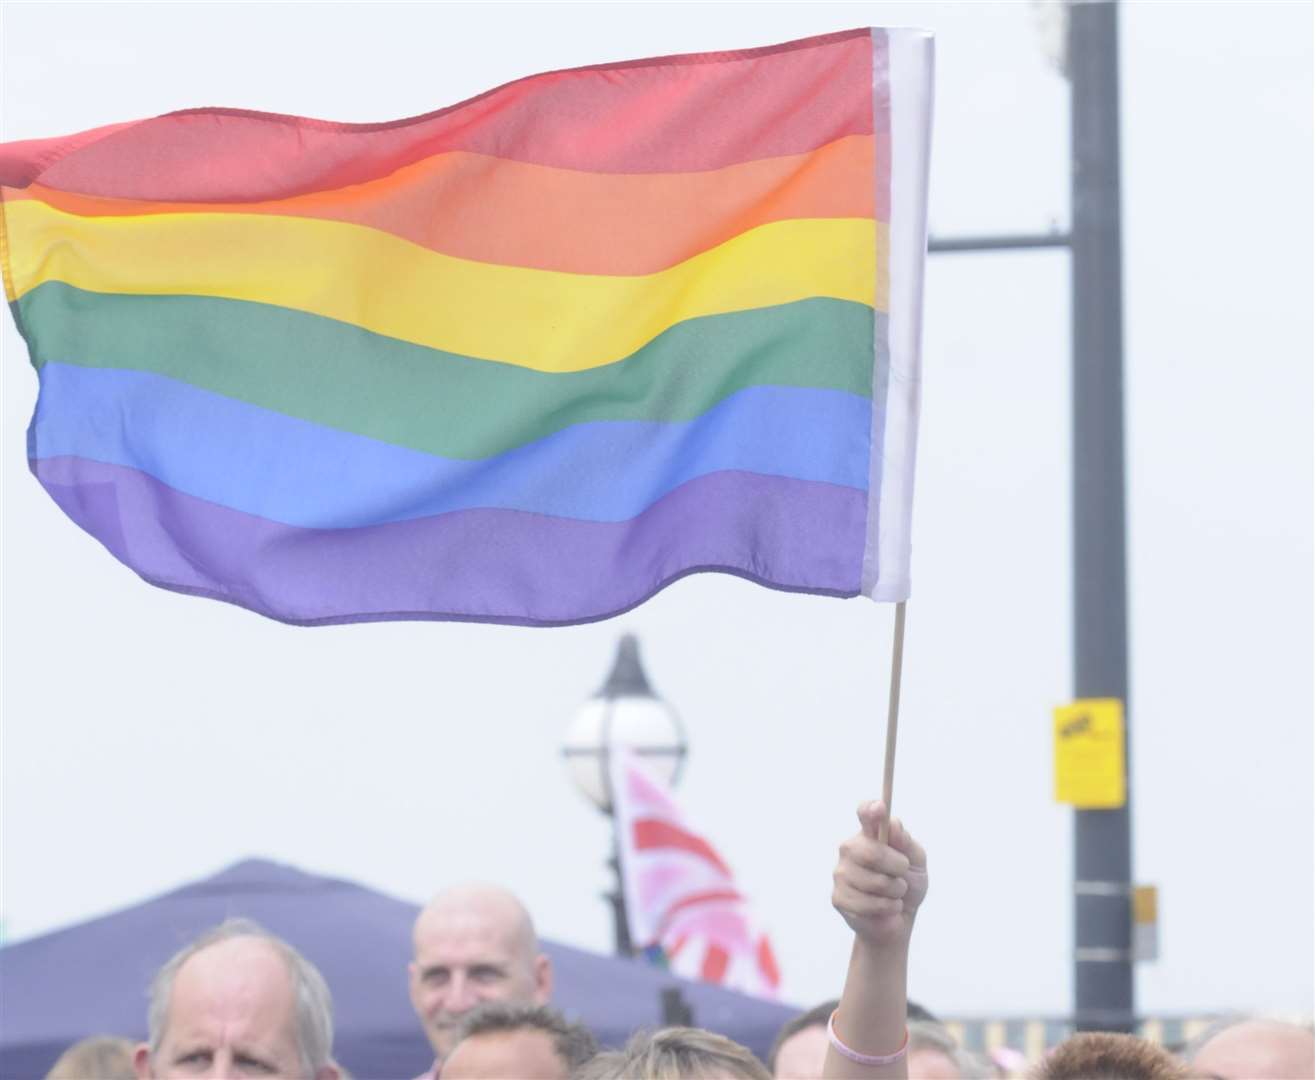 Photos from Thanet Pride 2010. Picture: Paul Dennis